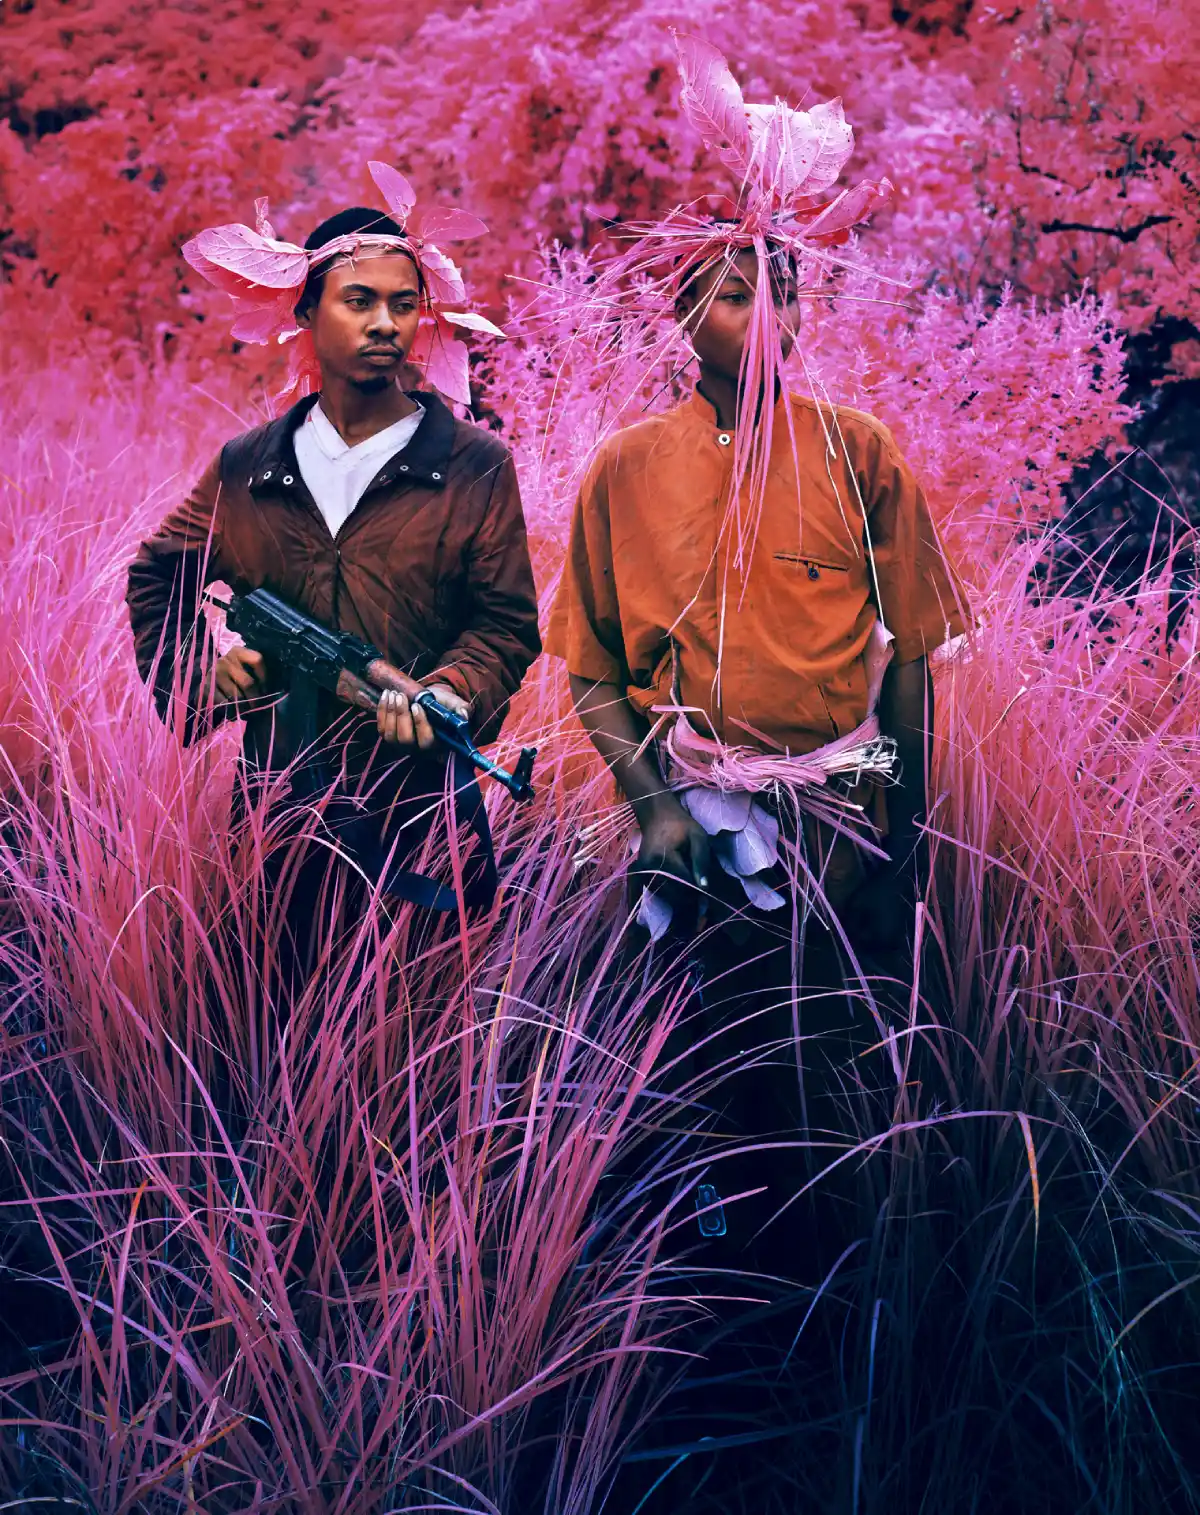 a photograph of two young men in a landscape taken using false color film that makes green objects appear in shades of pink and red